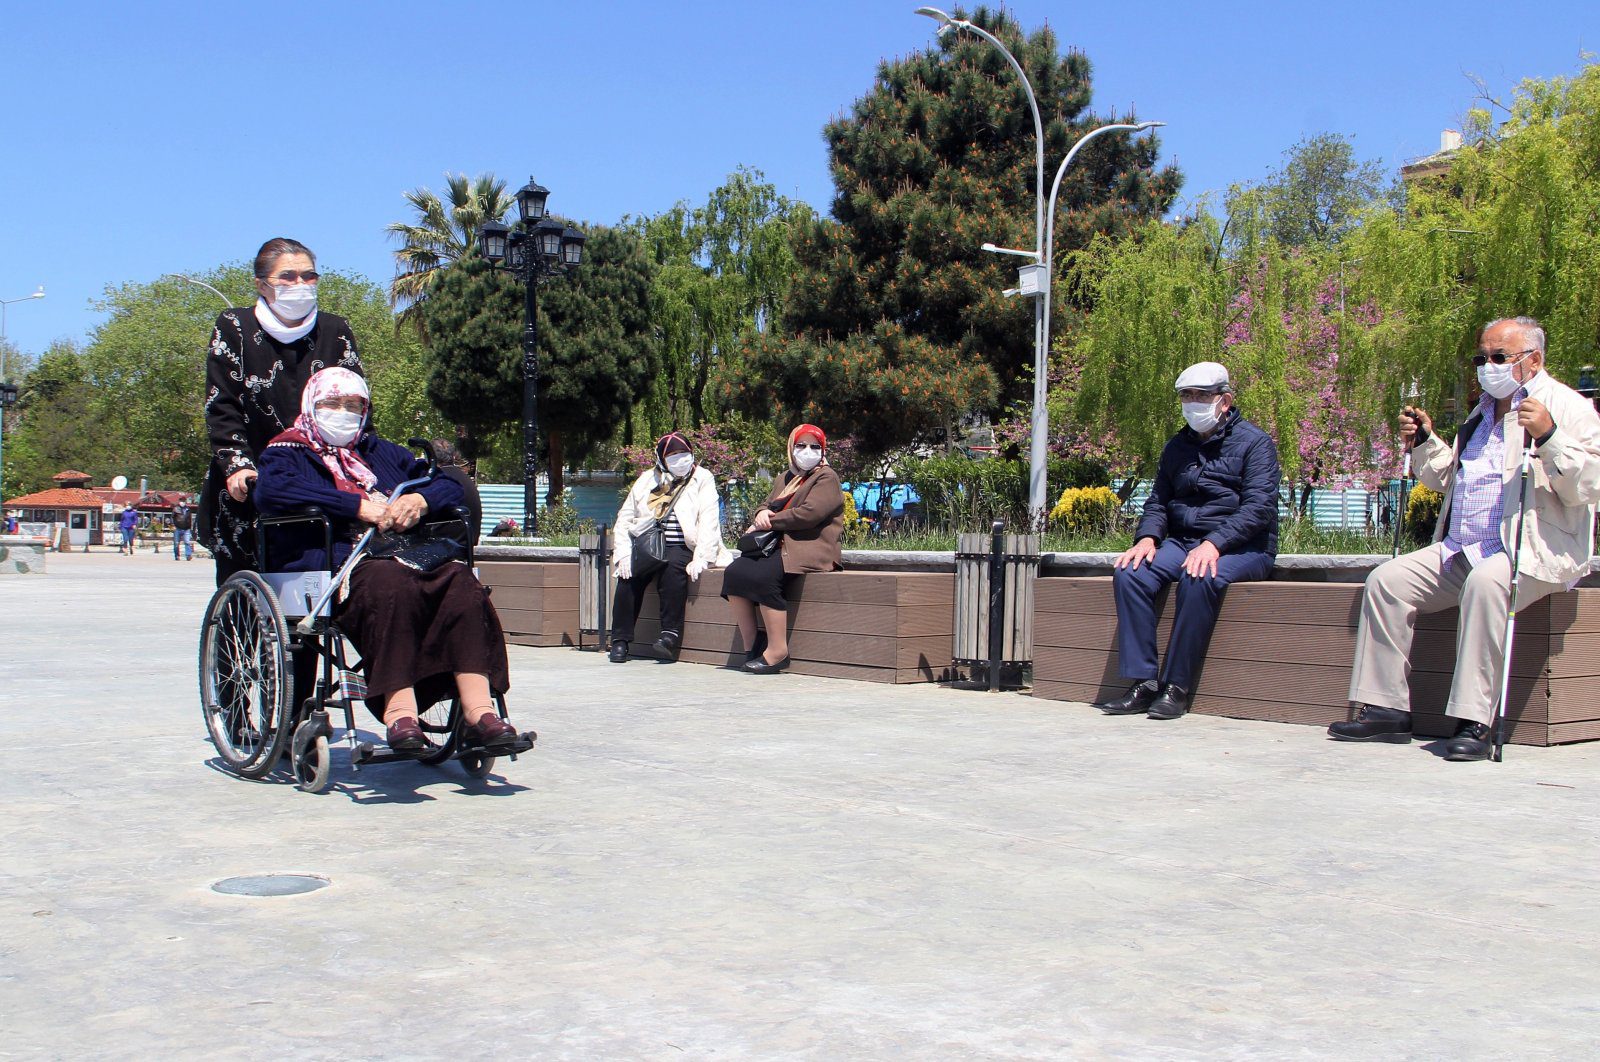 Depression prevalence among senior citizens in Turkey triples due to COVID-19